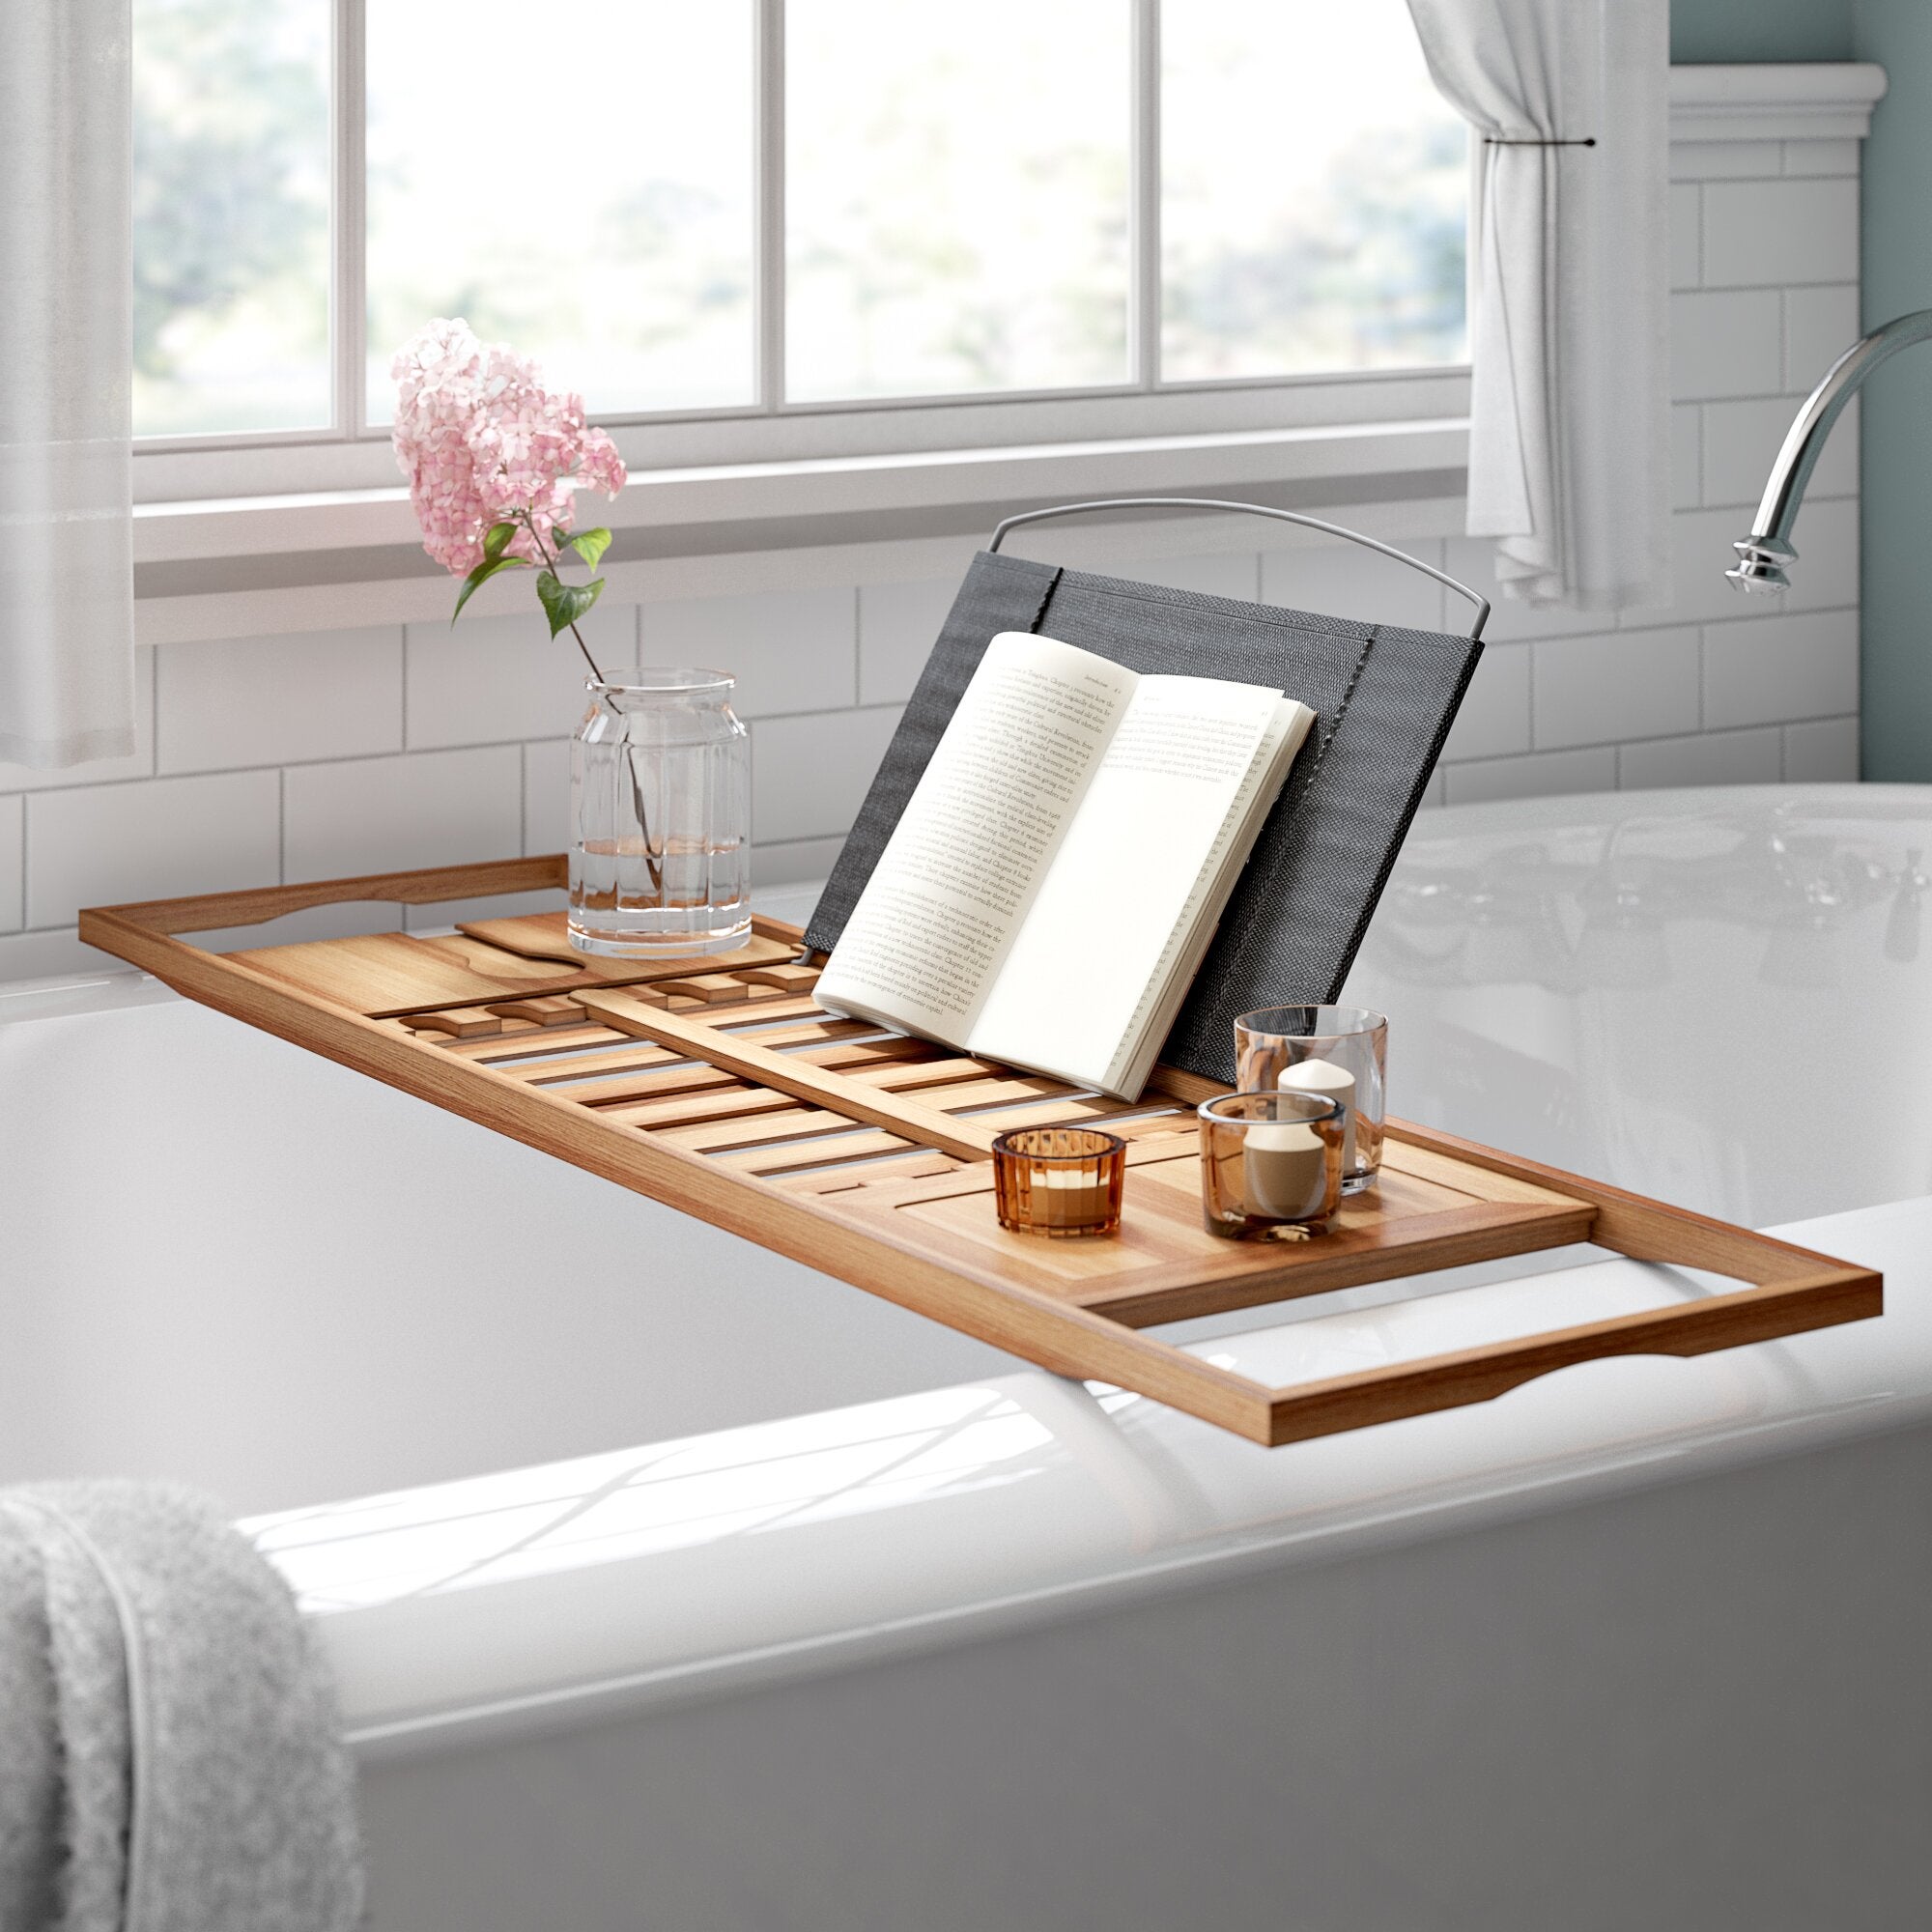  3-in-1 Premium Bathtub Caddy, Laptop Desk & Bed Tray with  Extendable Arms and Adjustable Legs - Includes a Free Soap Dish, Two Spa  Trays and Tablet/Wine Glass/Candle/Phone Holders - Natural Bamboo 